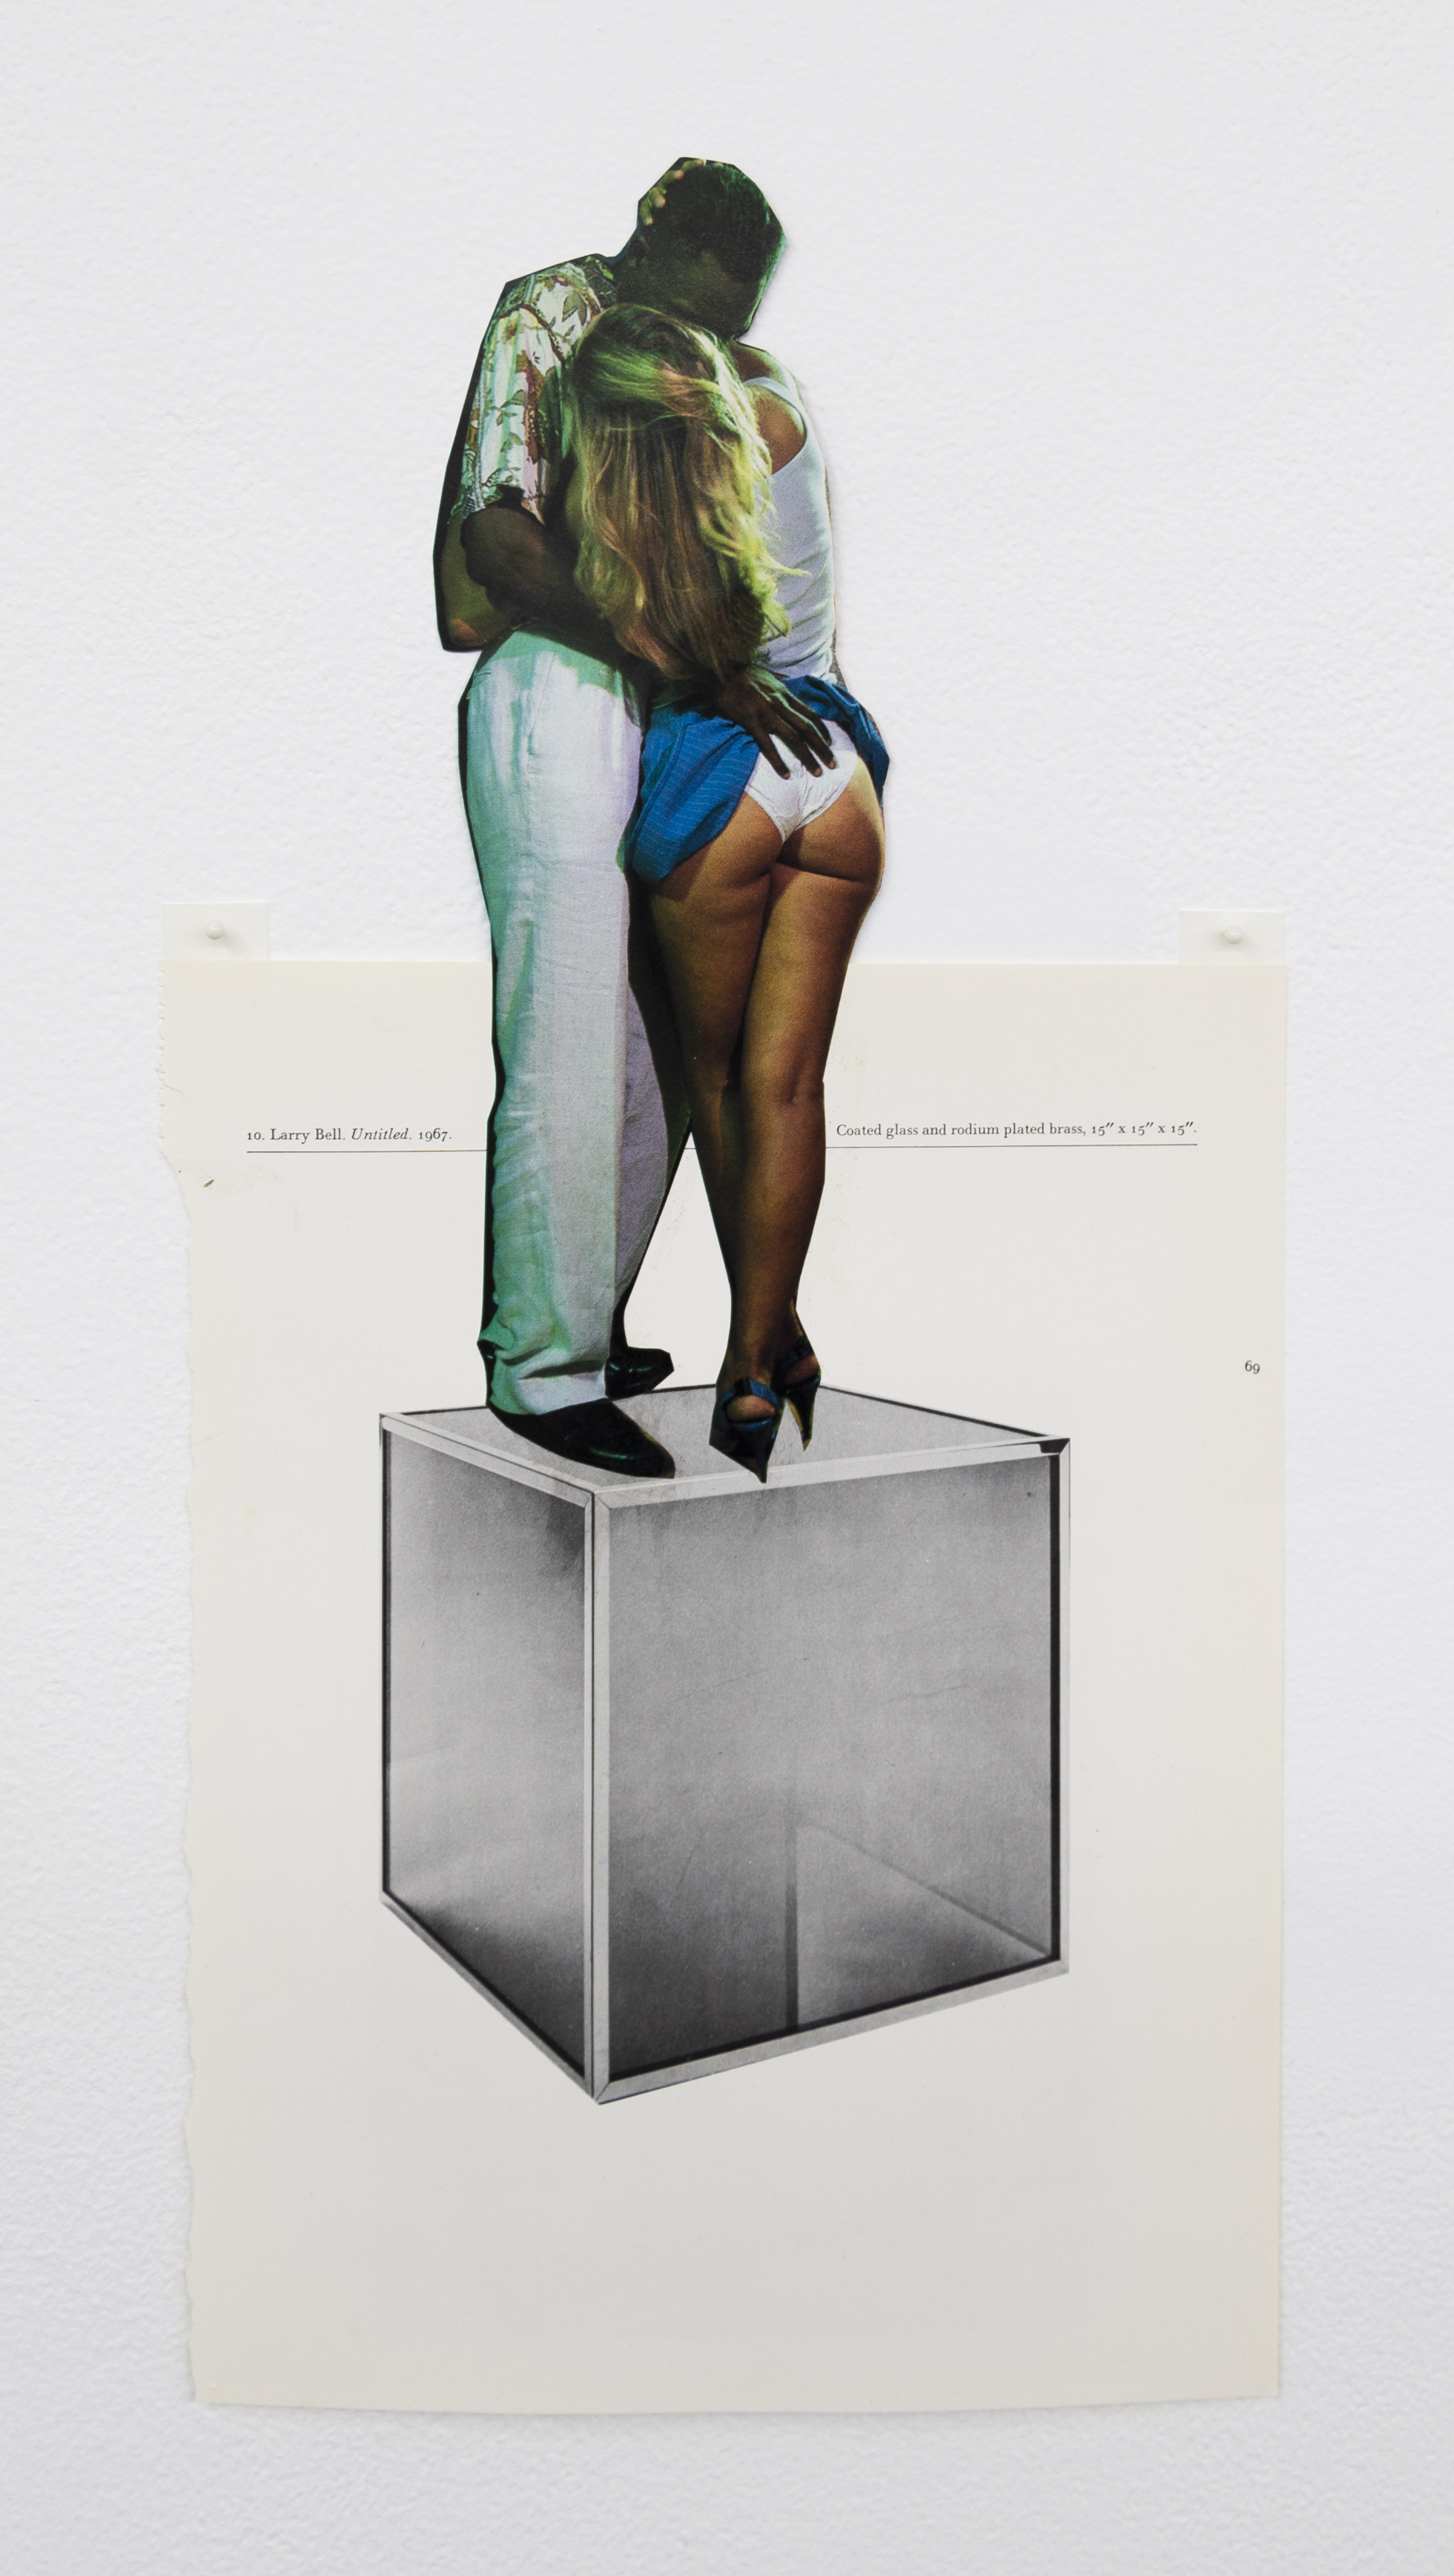  Narcissister,  Studies for Participatory Sculptures, Untitled (Performing an interracial couple, after Larry Bell) , 2018, Paper, rubber cement, 17 x 8.5 in 